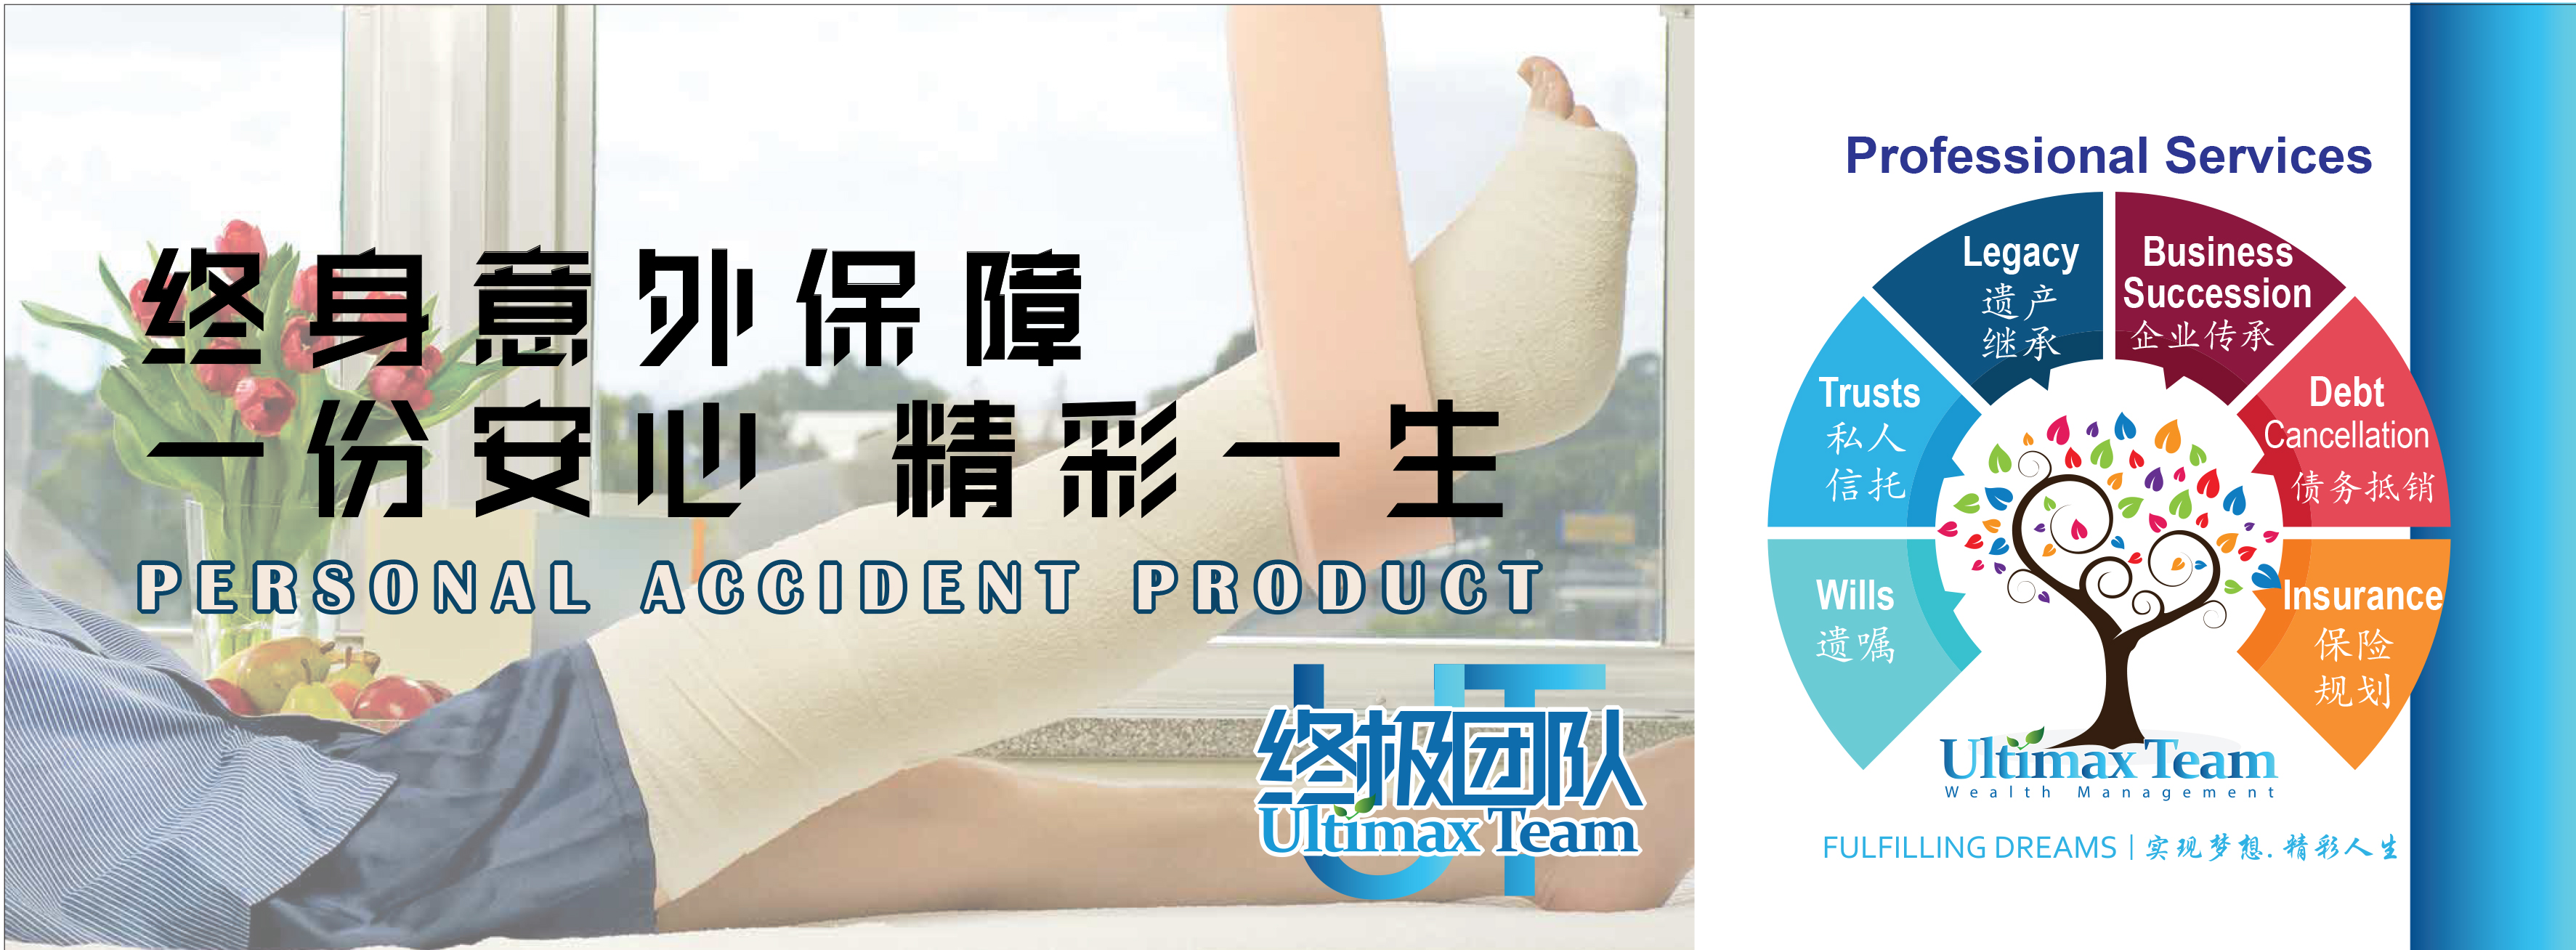 PERSONAL ACCIDENT PRODUCT